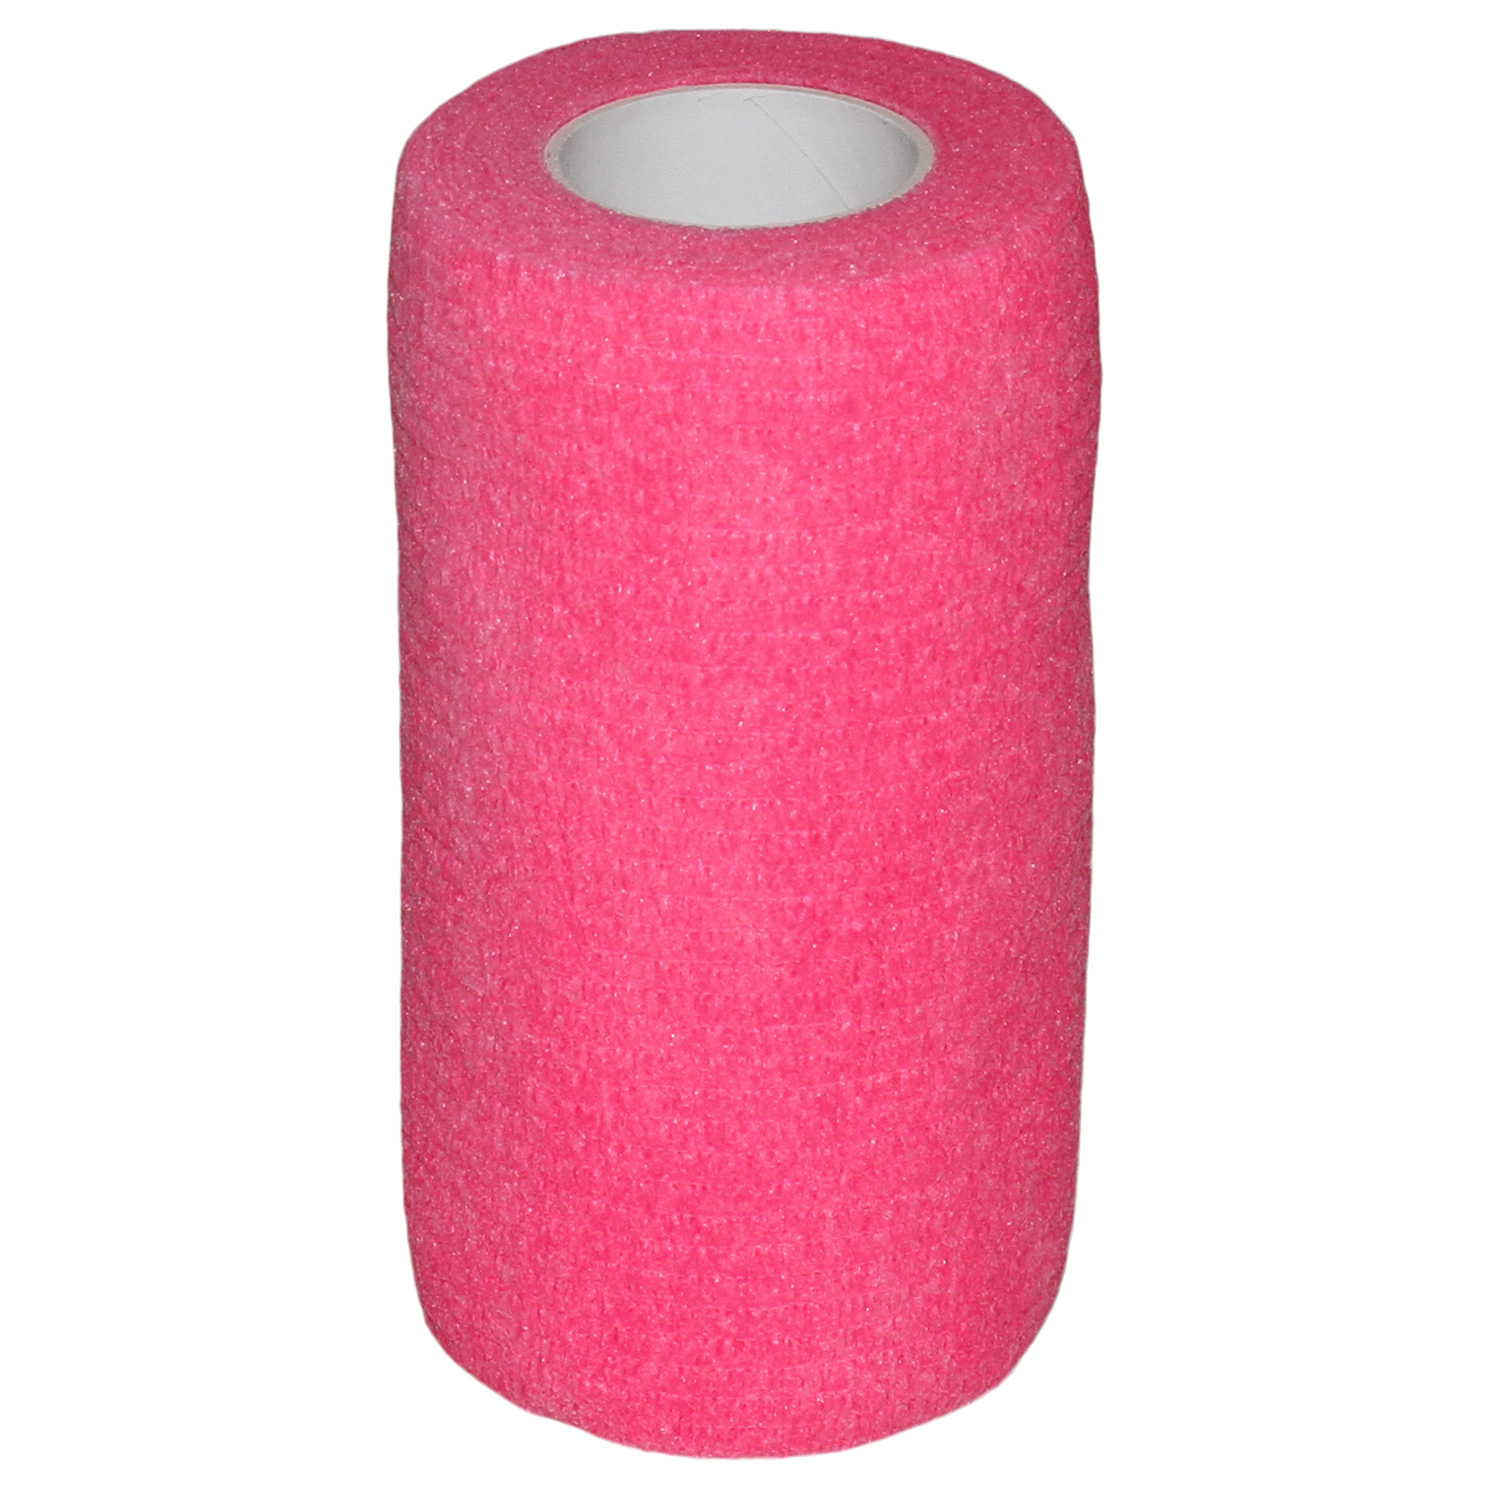 BEINBANDASJE VET QUICK RIP Beinbandasje Vet Quick Rip One Size Rosa